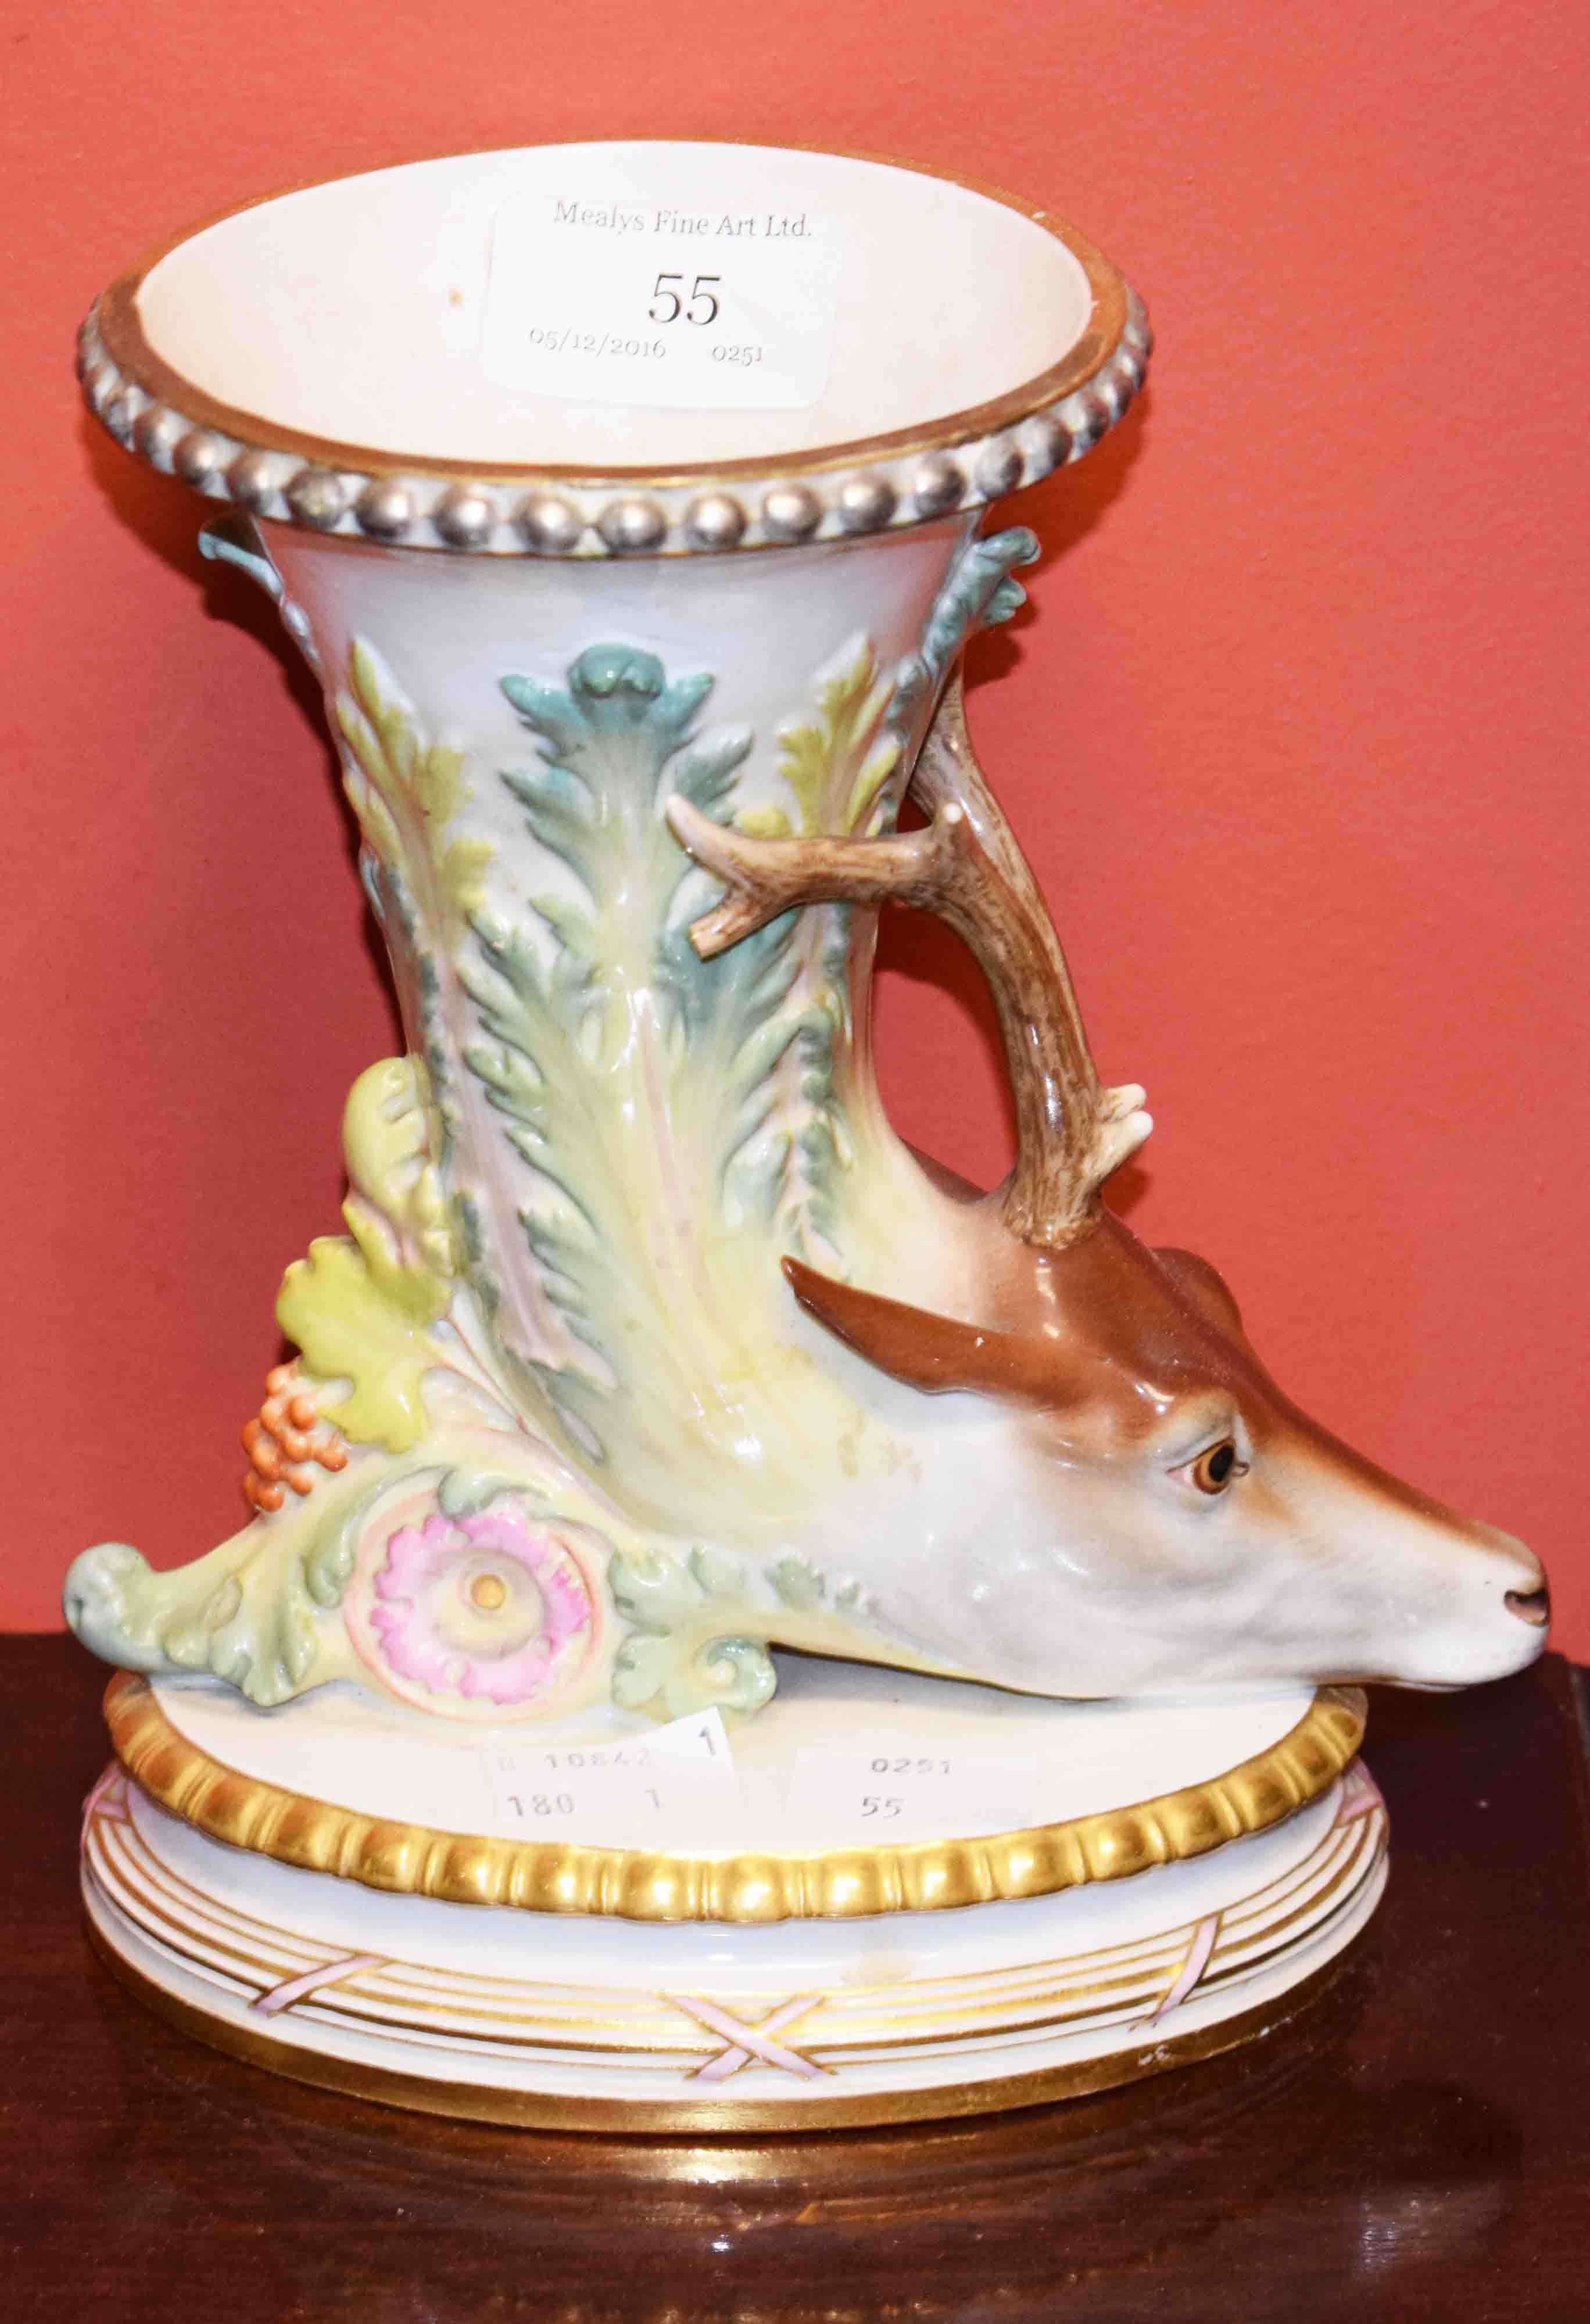 A LARGE 19TH CENTURY MEISSEN CORNUCOPIA VASE, with stag head terminal on an oval base, 7.5” (19cm).